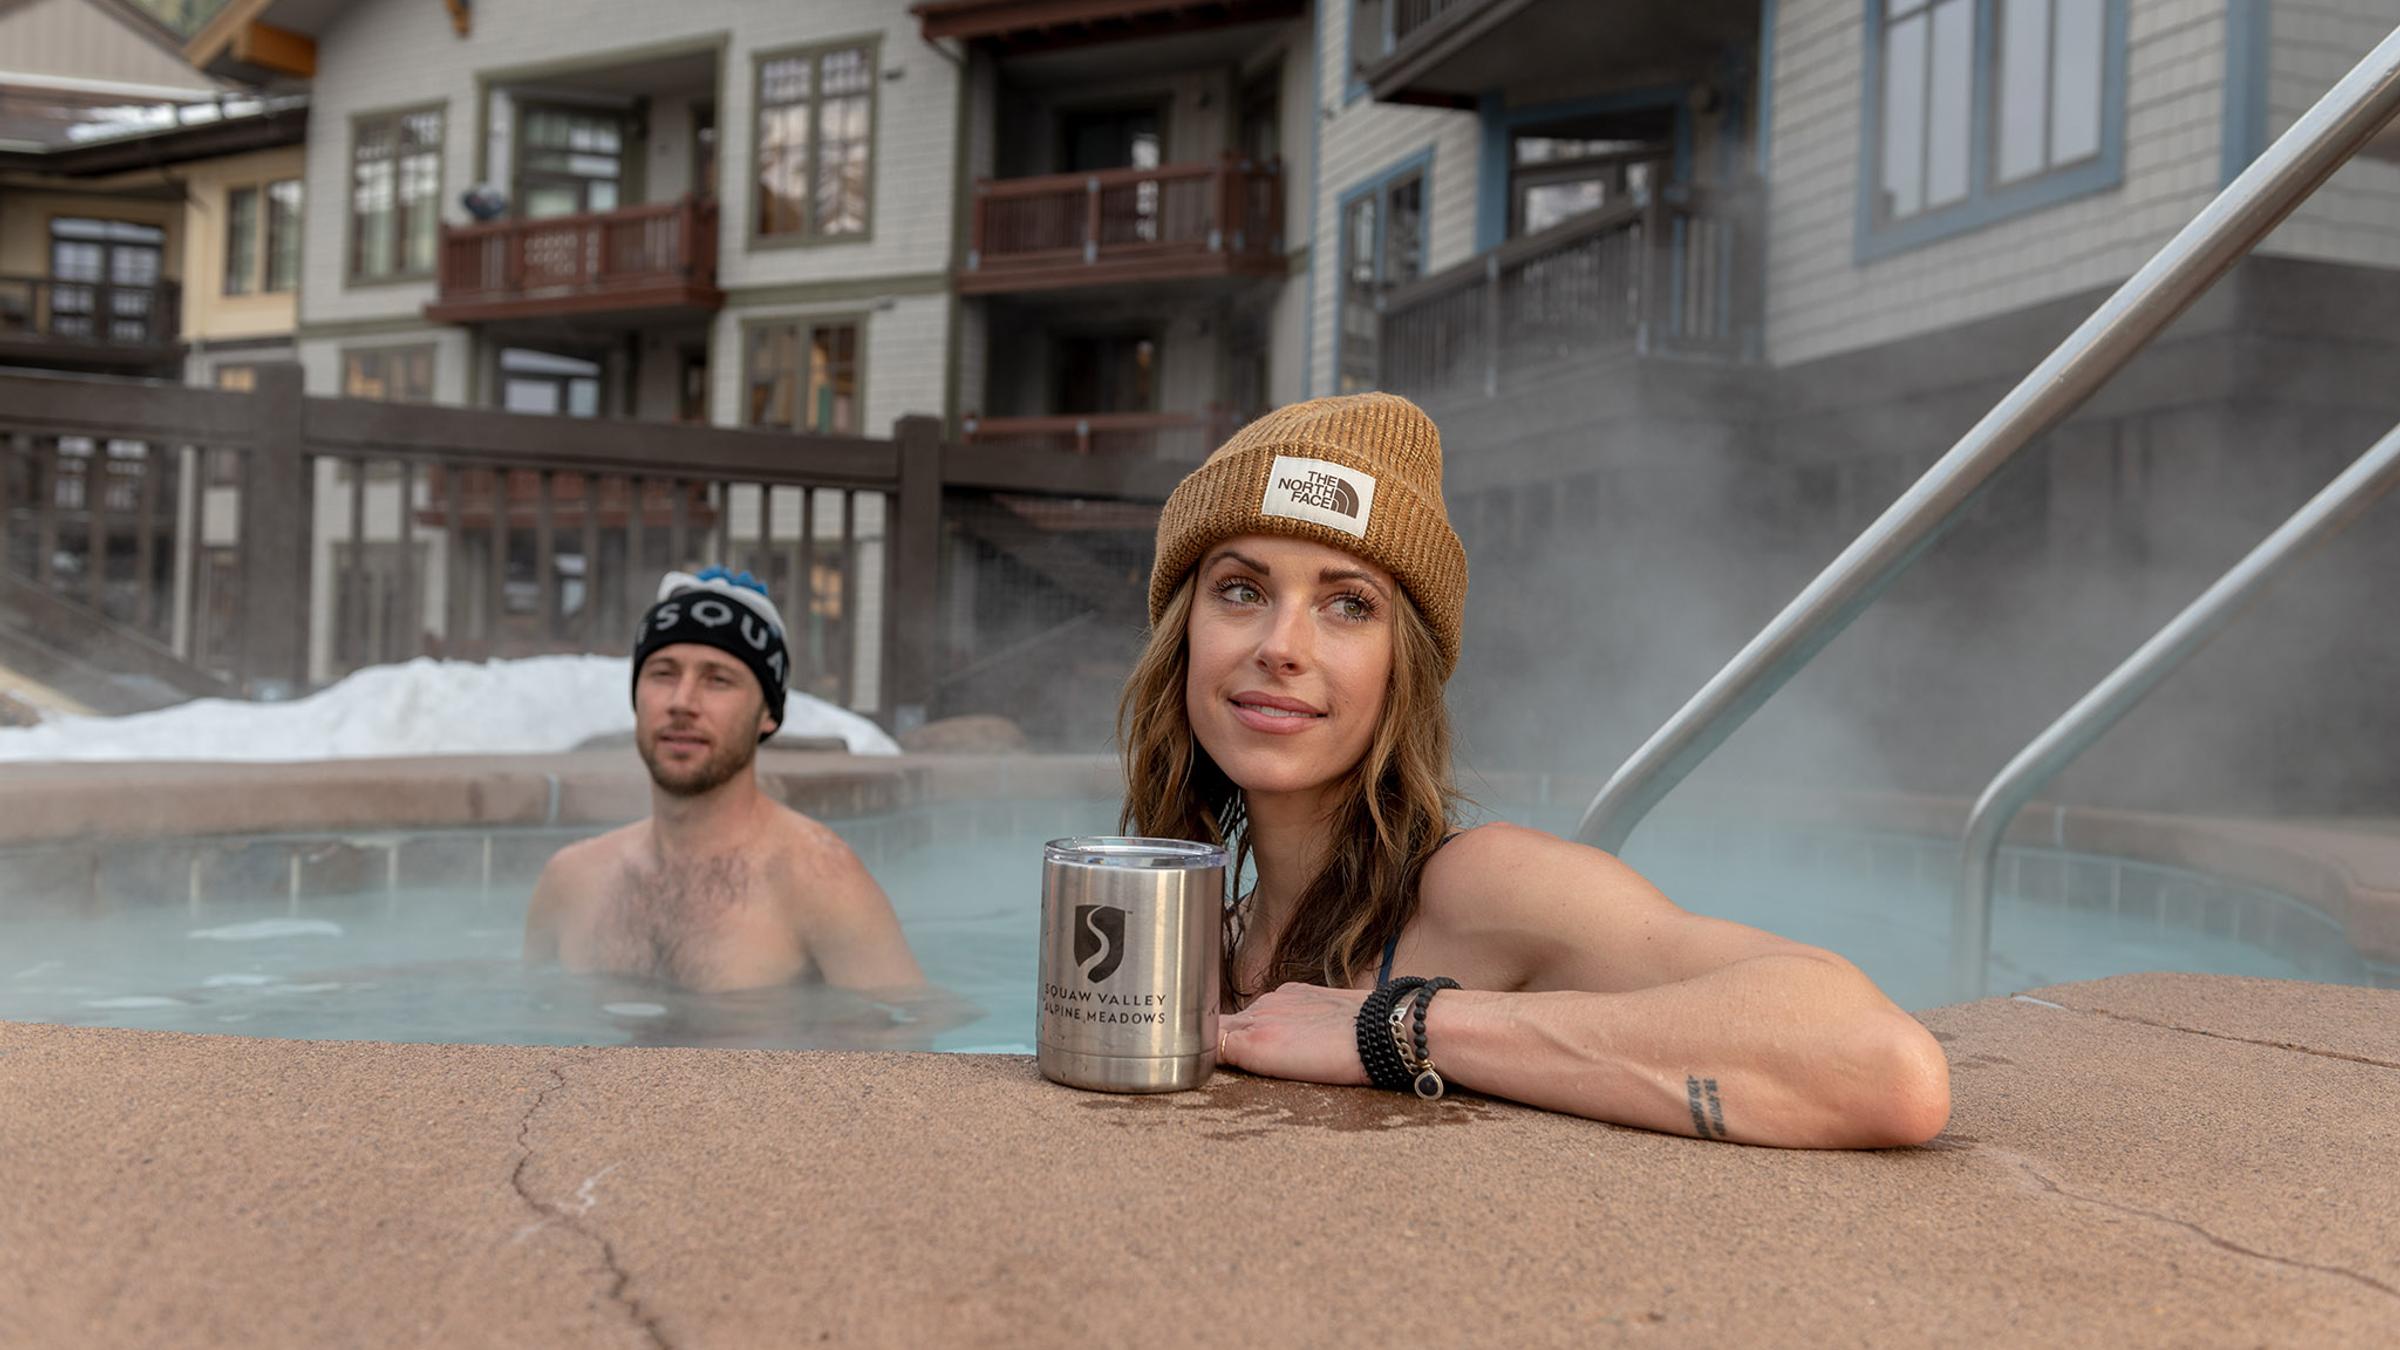 A man and woman soak in one of The Village at Squaw Valley's hot tubs